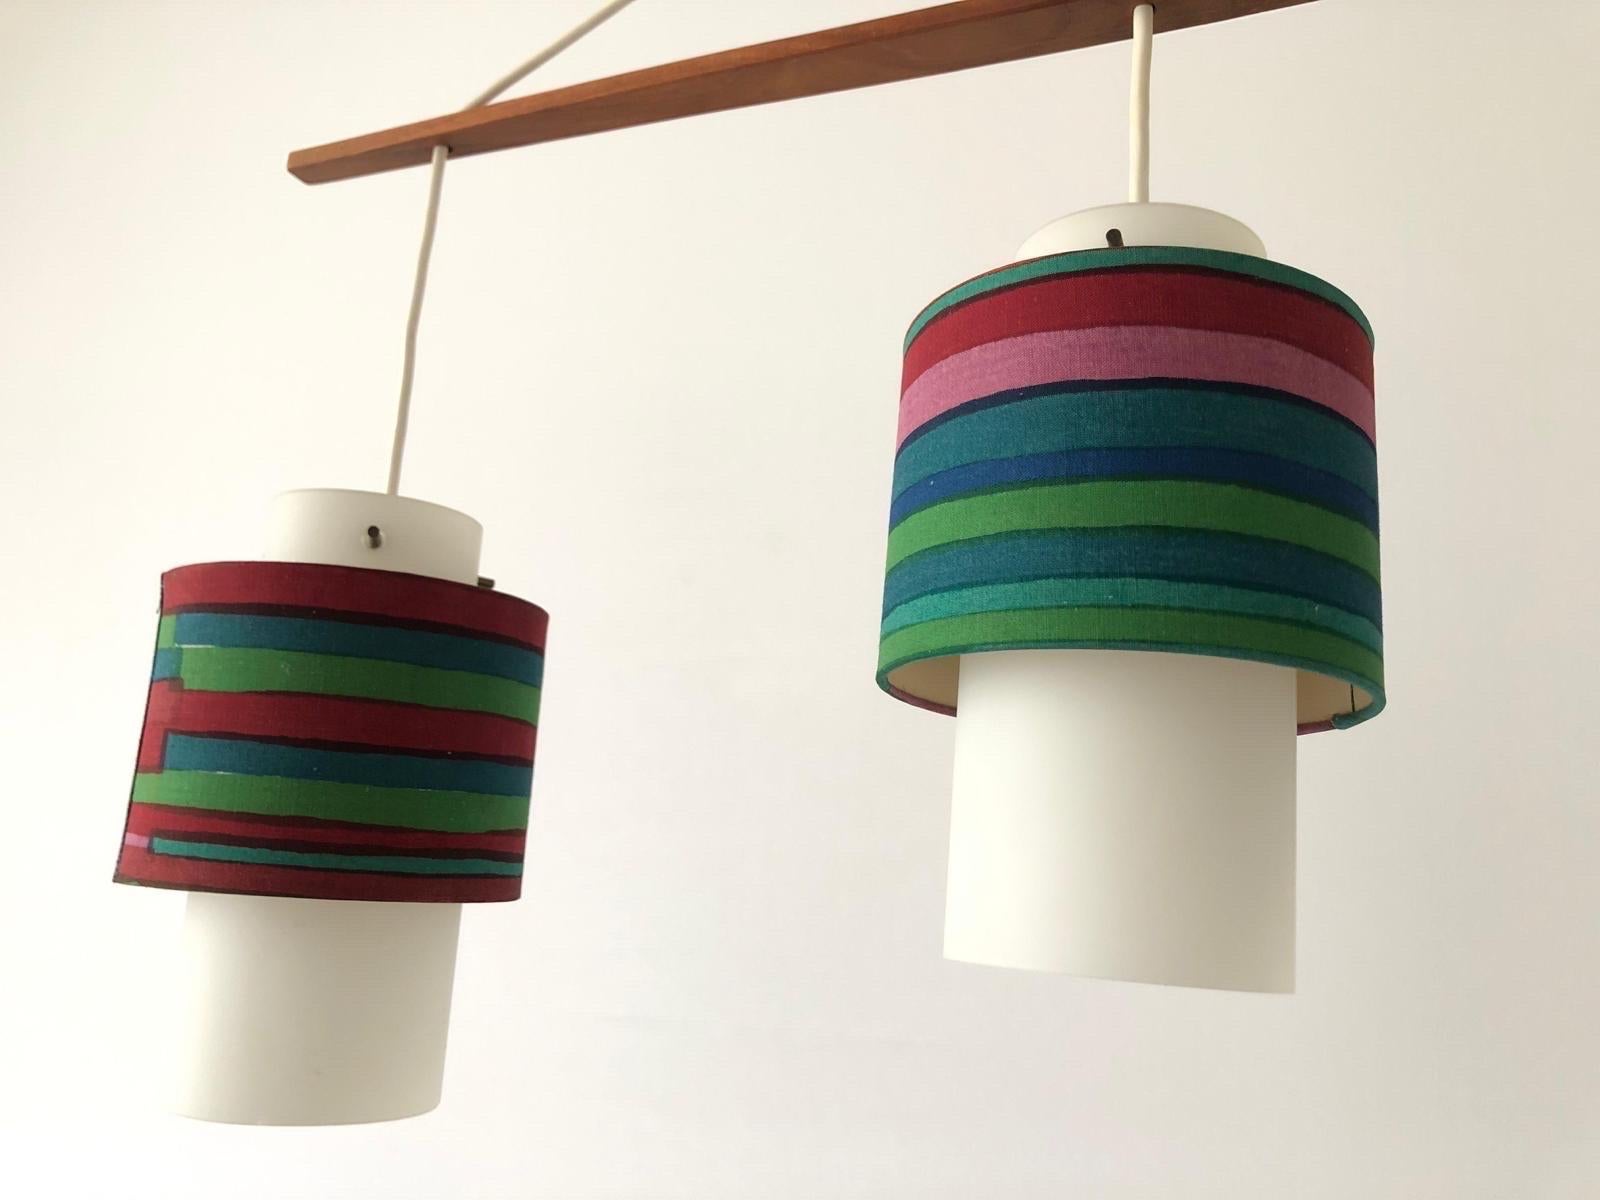 Retro Fabric Shade & Glass Triple Pendant Lamp, 1960s, Germany For Sale 2